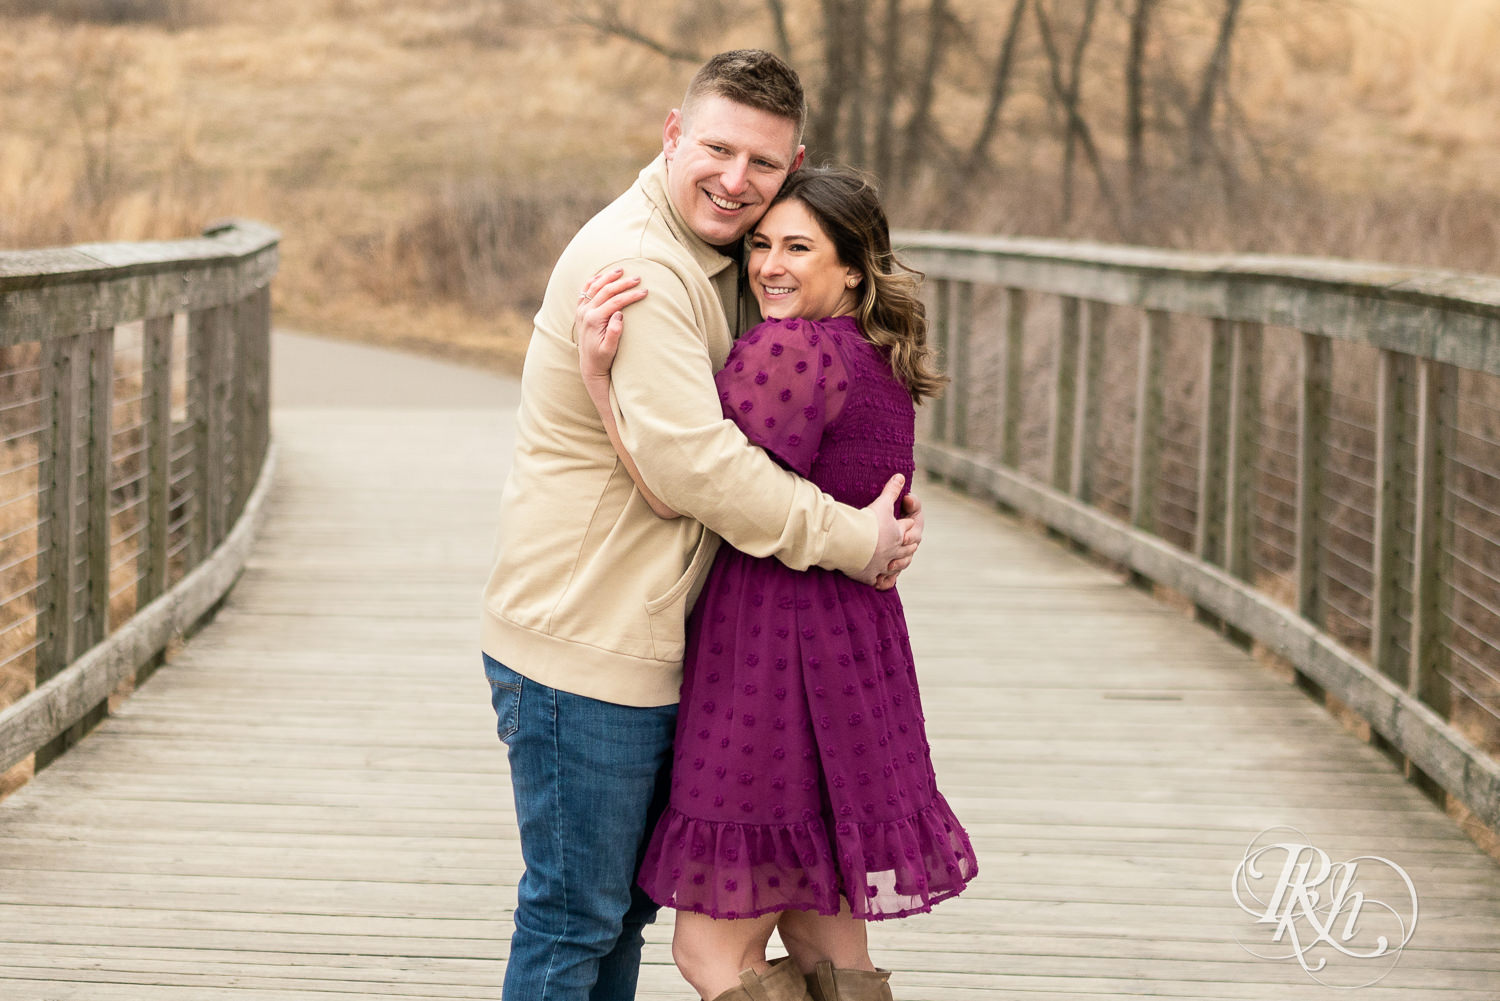 Man in jeans and woman in magenta dress smile on a bridge during March engagement photography in Eagan, Minnesota.